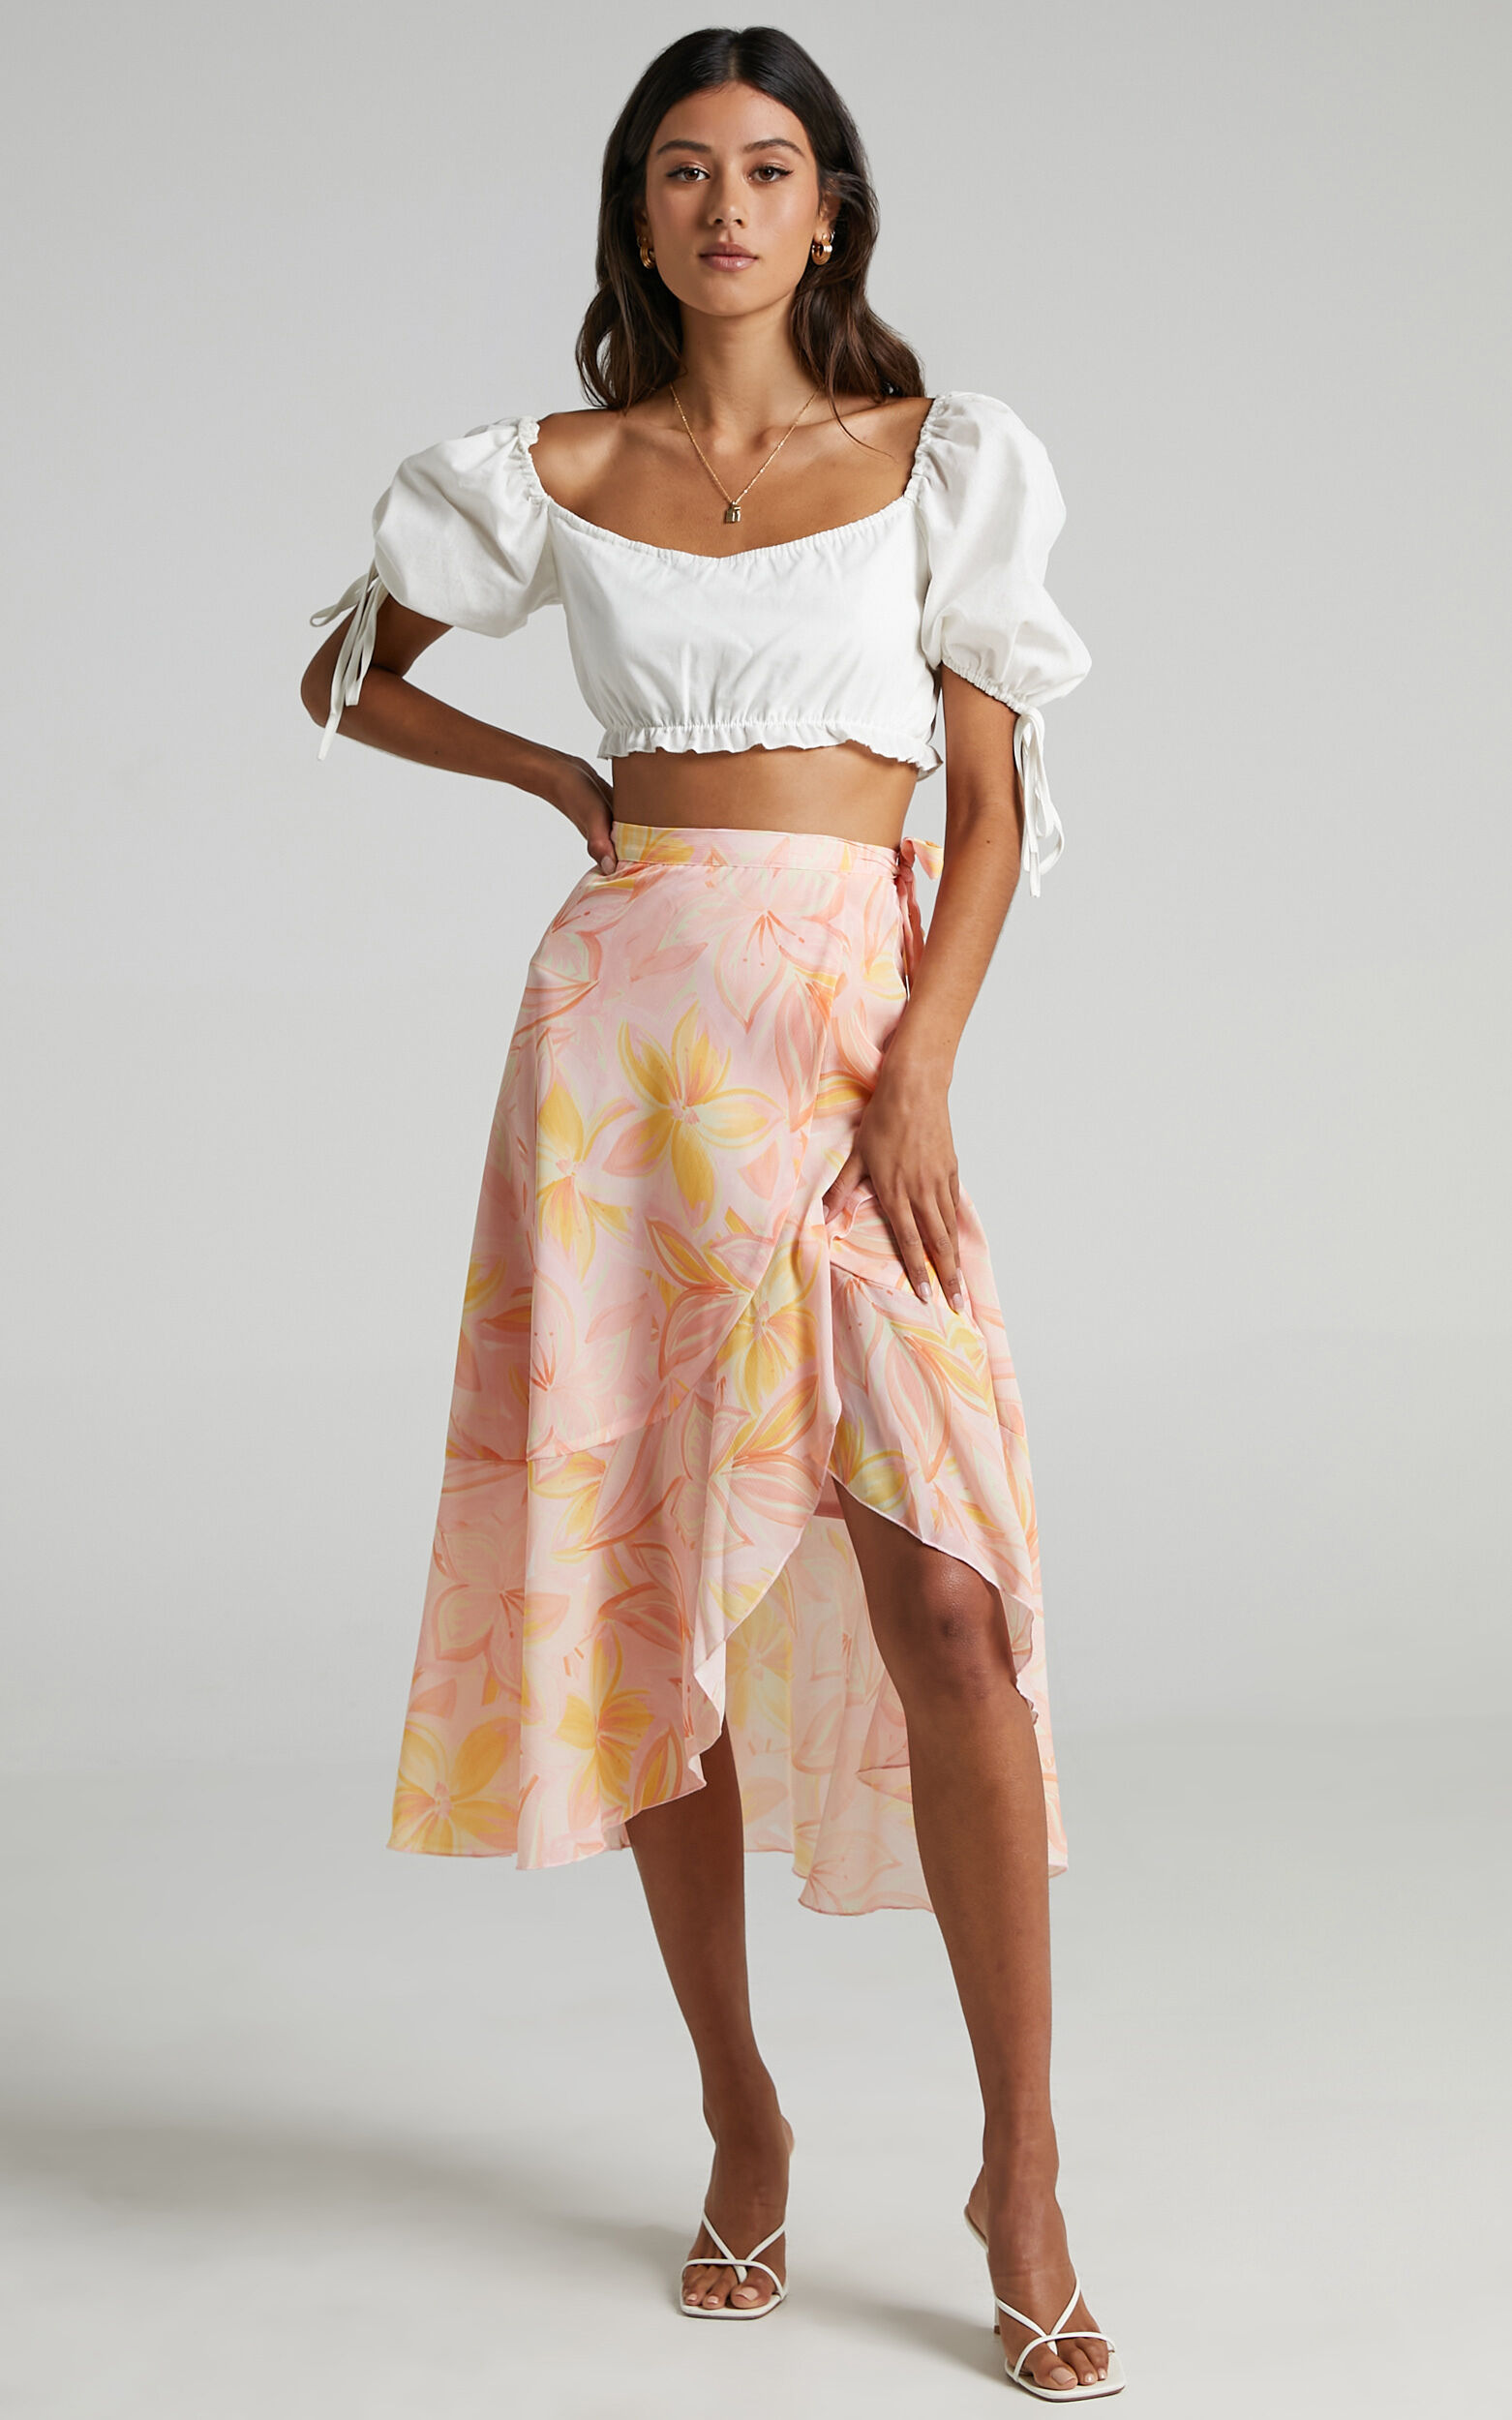 Add To The Mix Skirt in Summer Floral - 06, PNK1, super-hi-res image number null